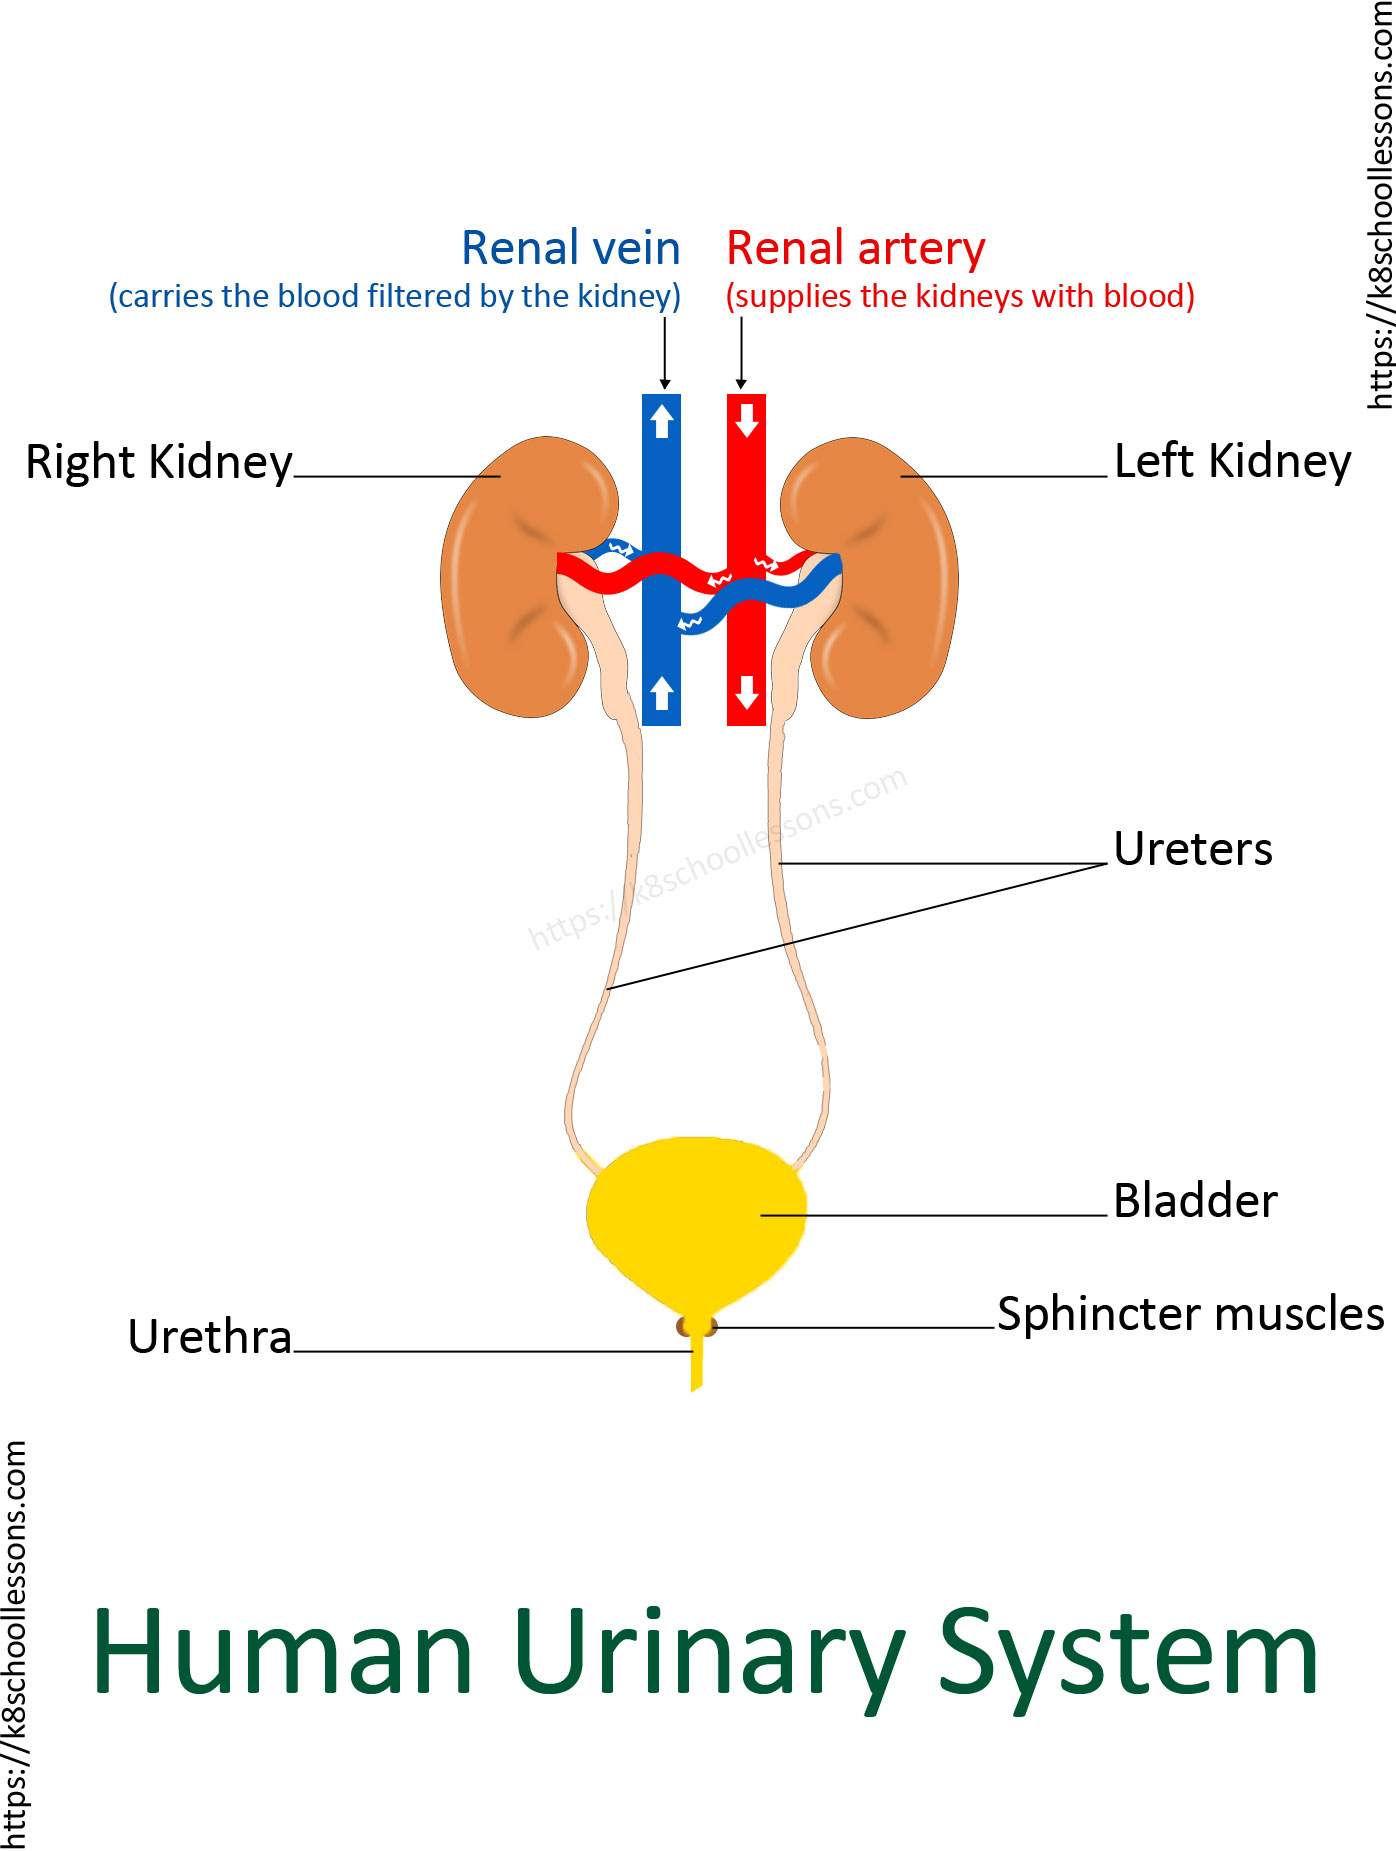 Human Urinary System for kids - Human Urinary System Diagram